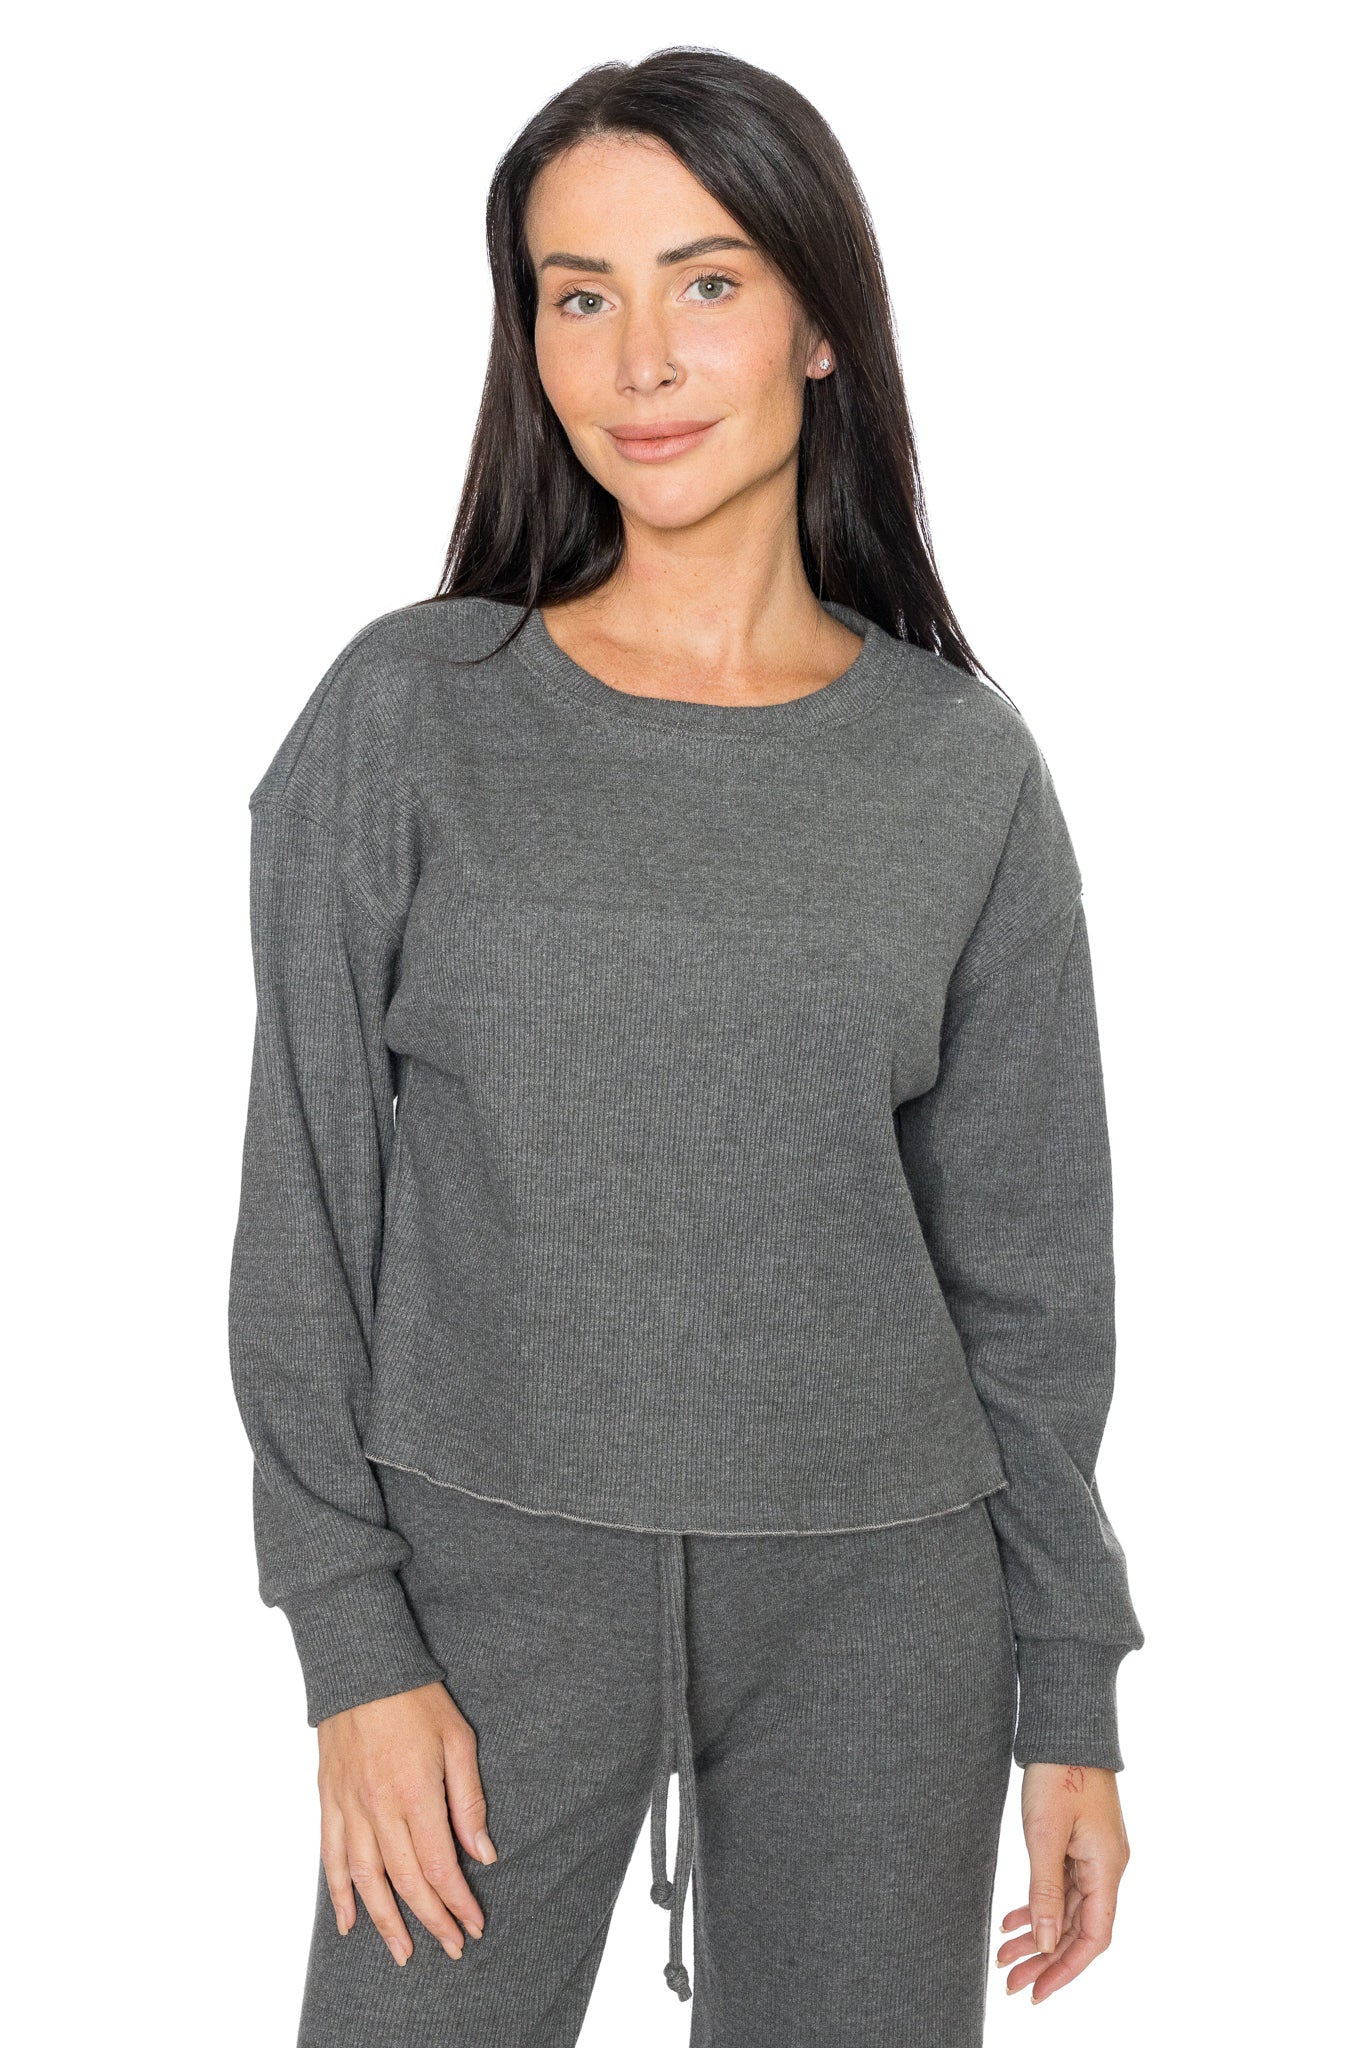 Isla Pullover by Perfect White Tee